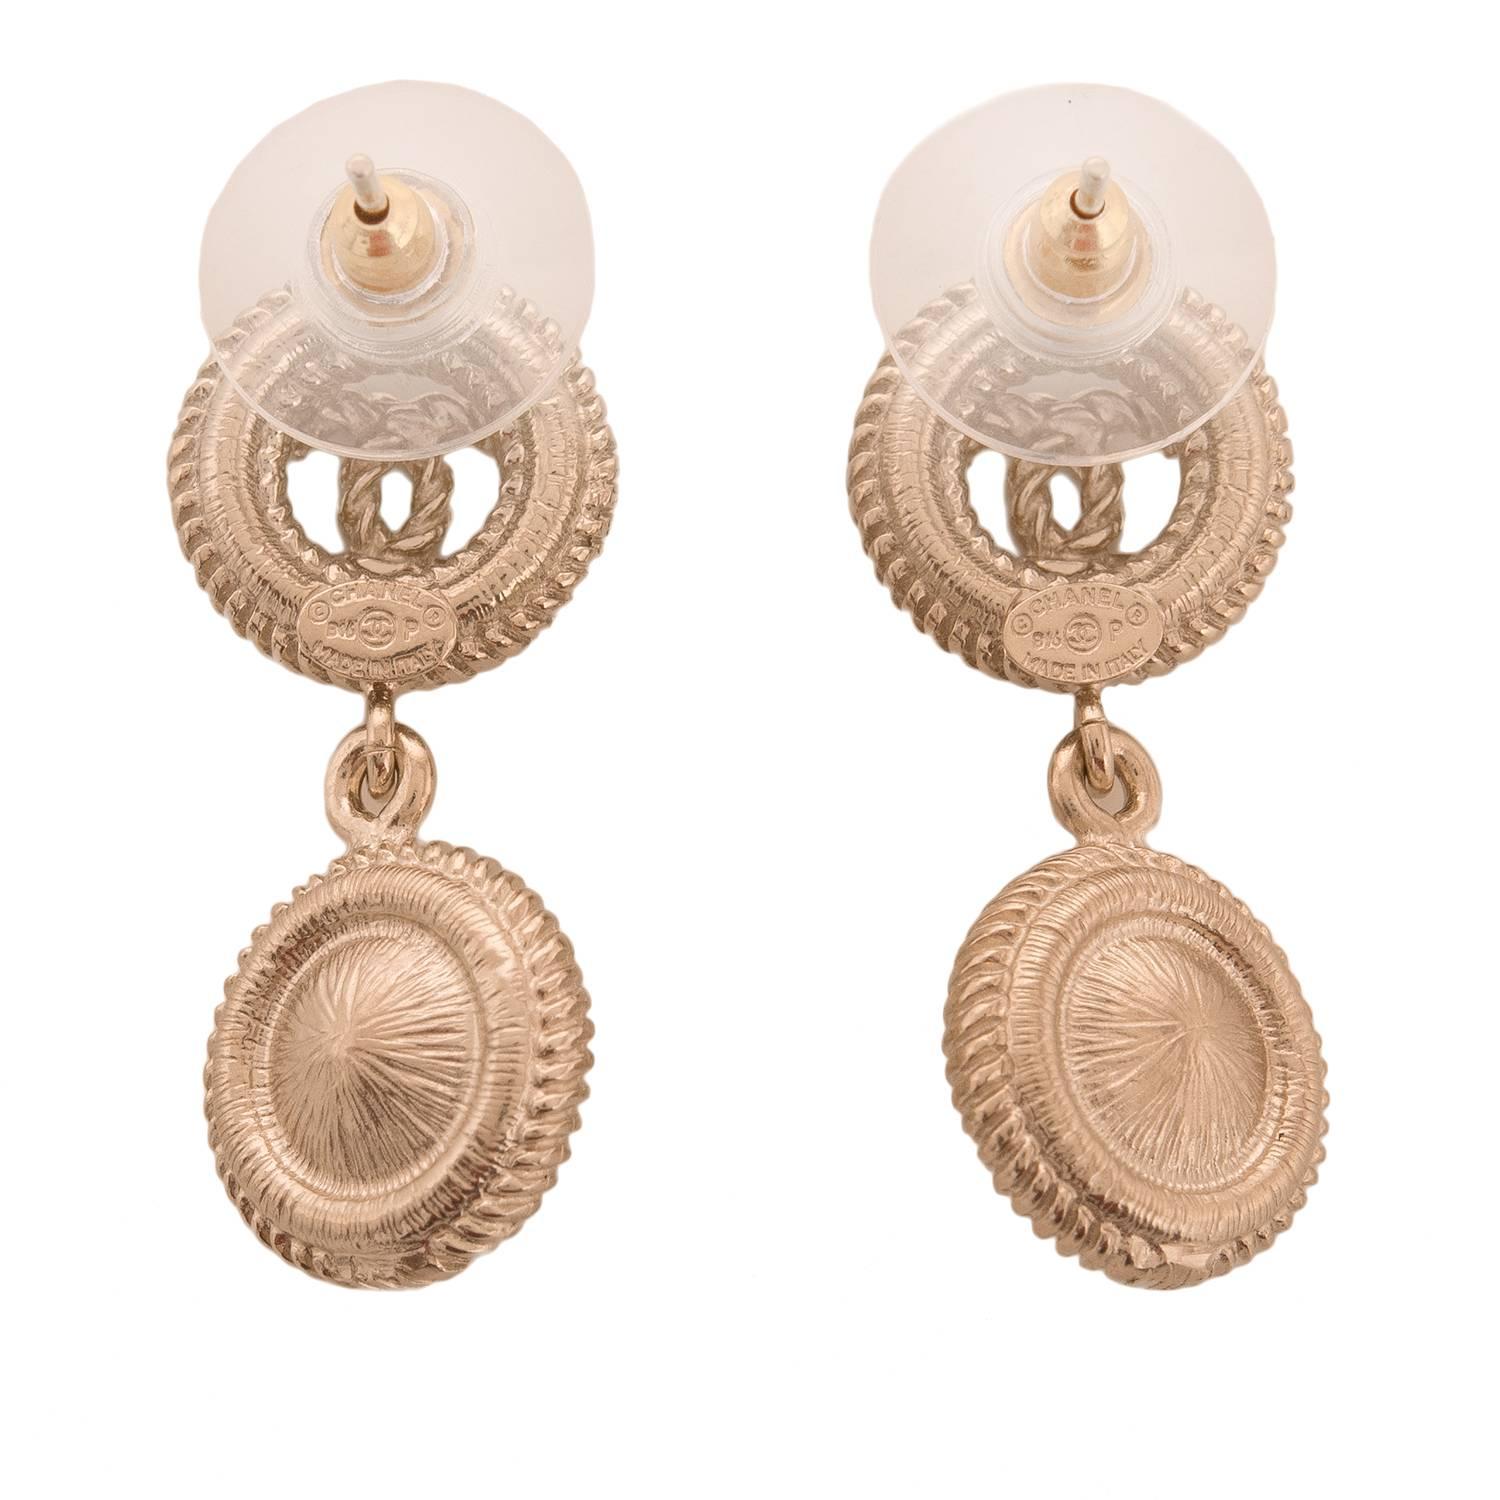 Chanel light gold tone baroque style drop pierced earrings of CC logo ear clips, and faux pearls and light gold drops.

Collection: 16P

Condition: Pristine; never worn

Accompaned By: Chanel box and dustbag

Measurements: Earring length